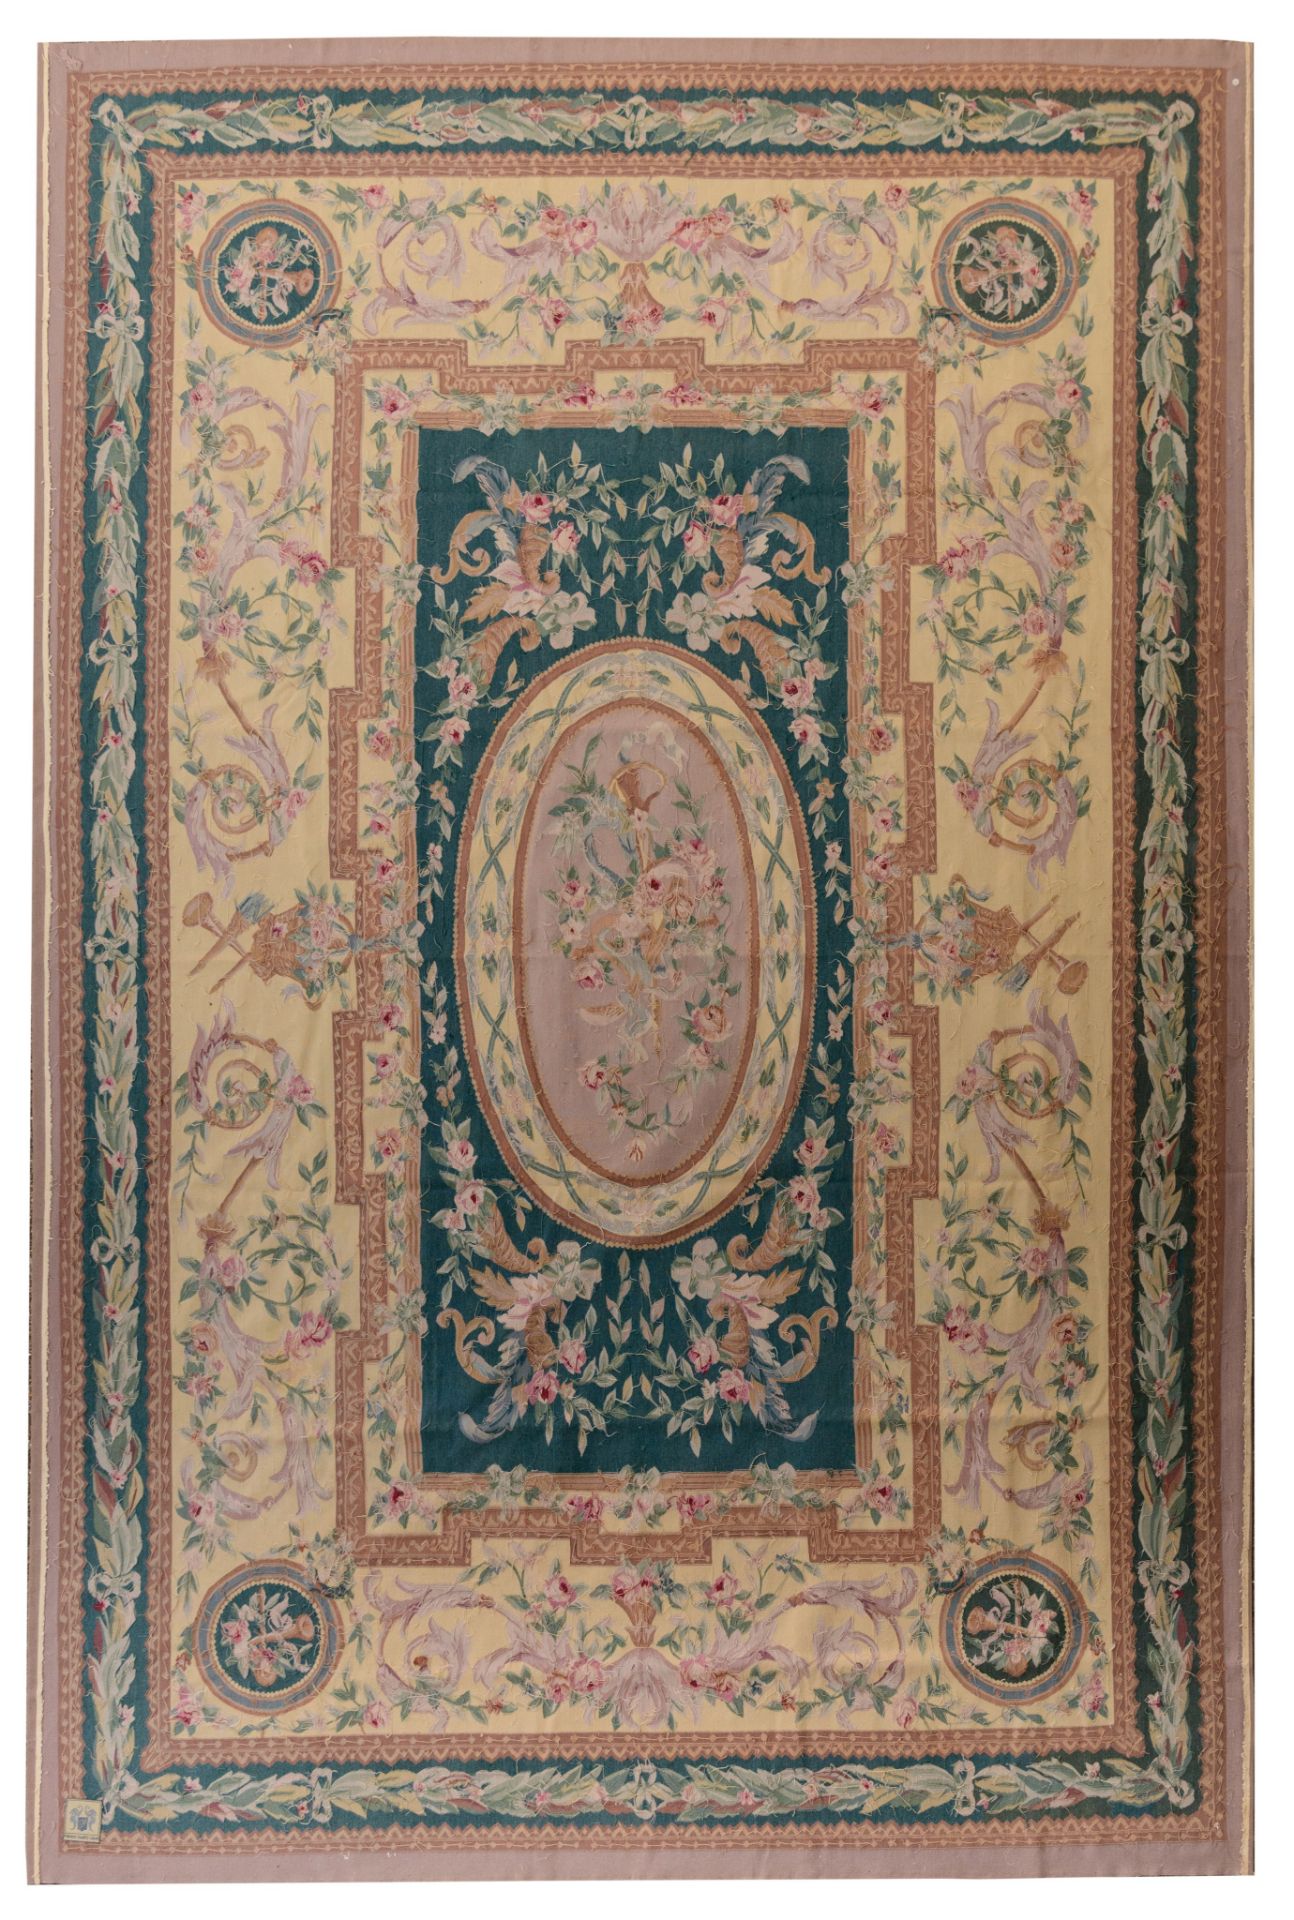 A large Aubusson rug, 553 x 370 cm - Image 2 of 9